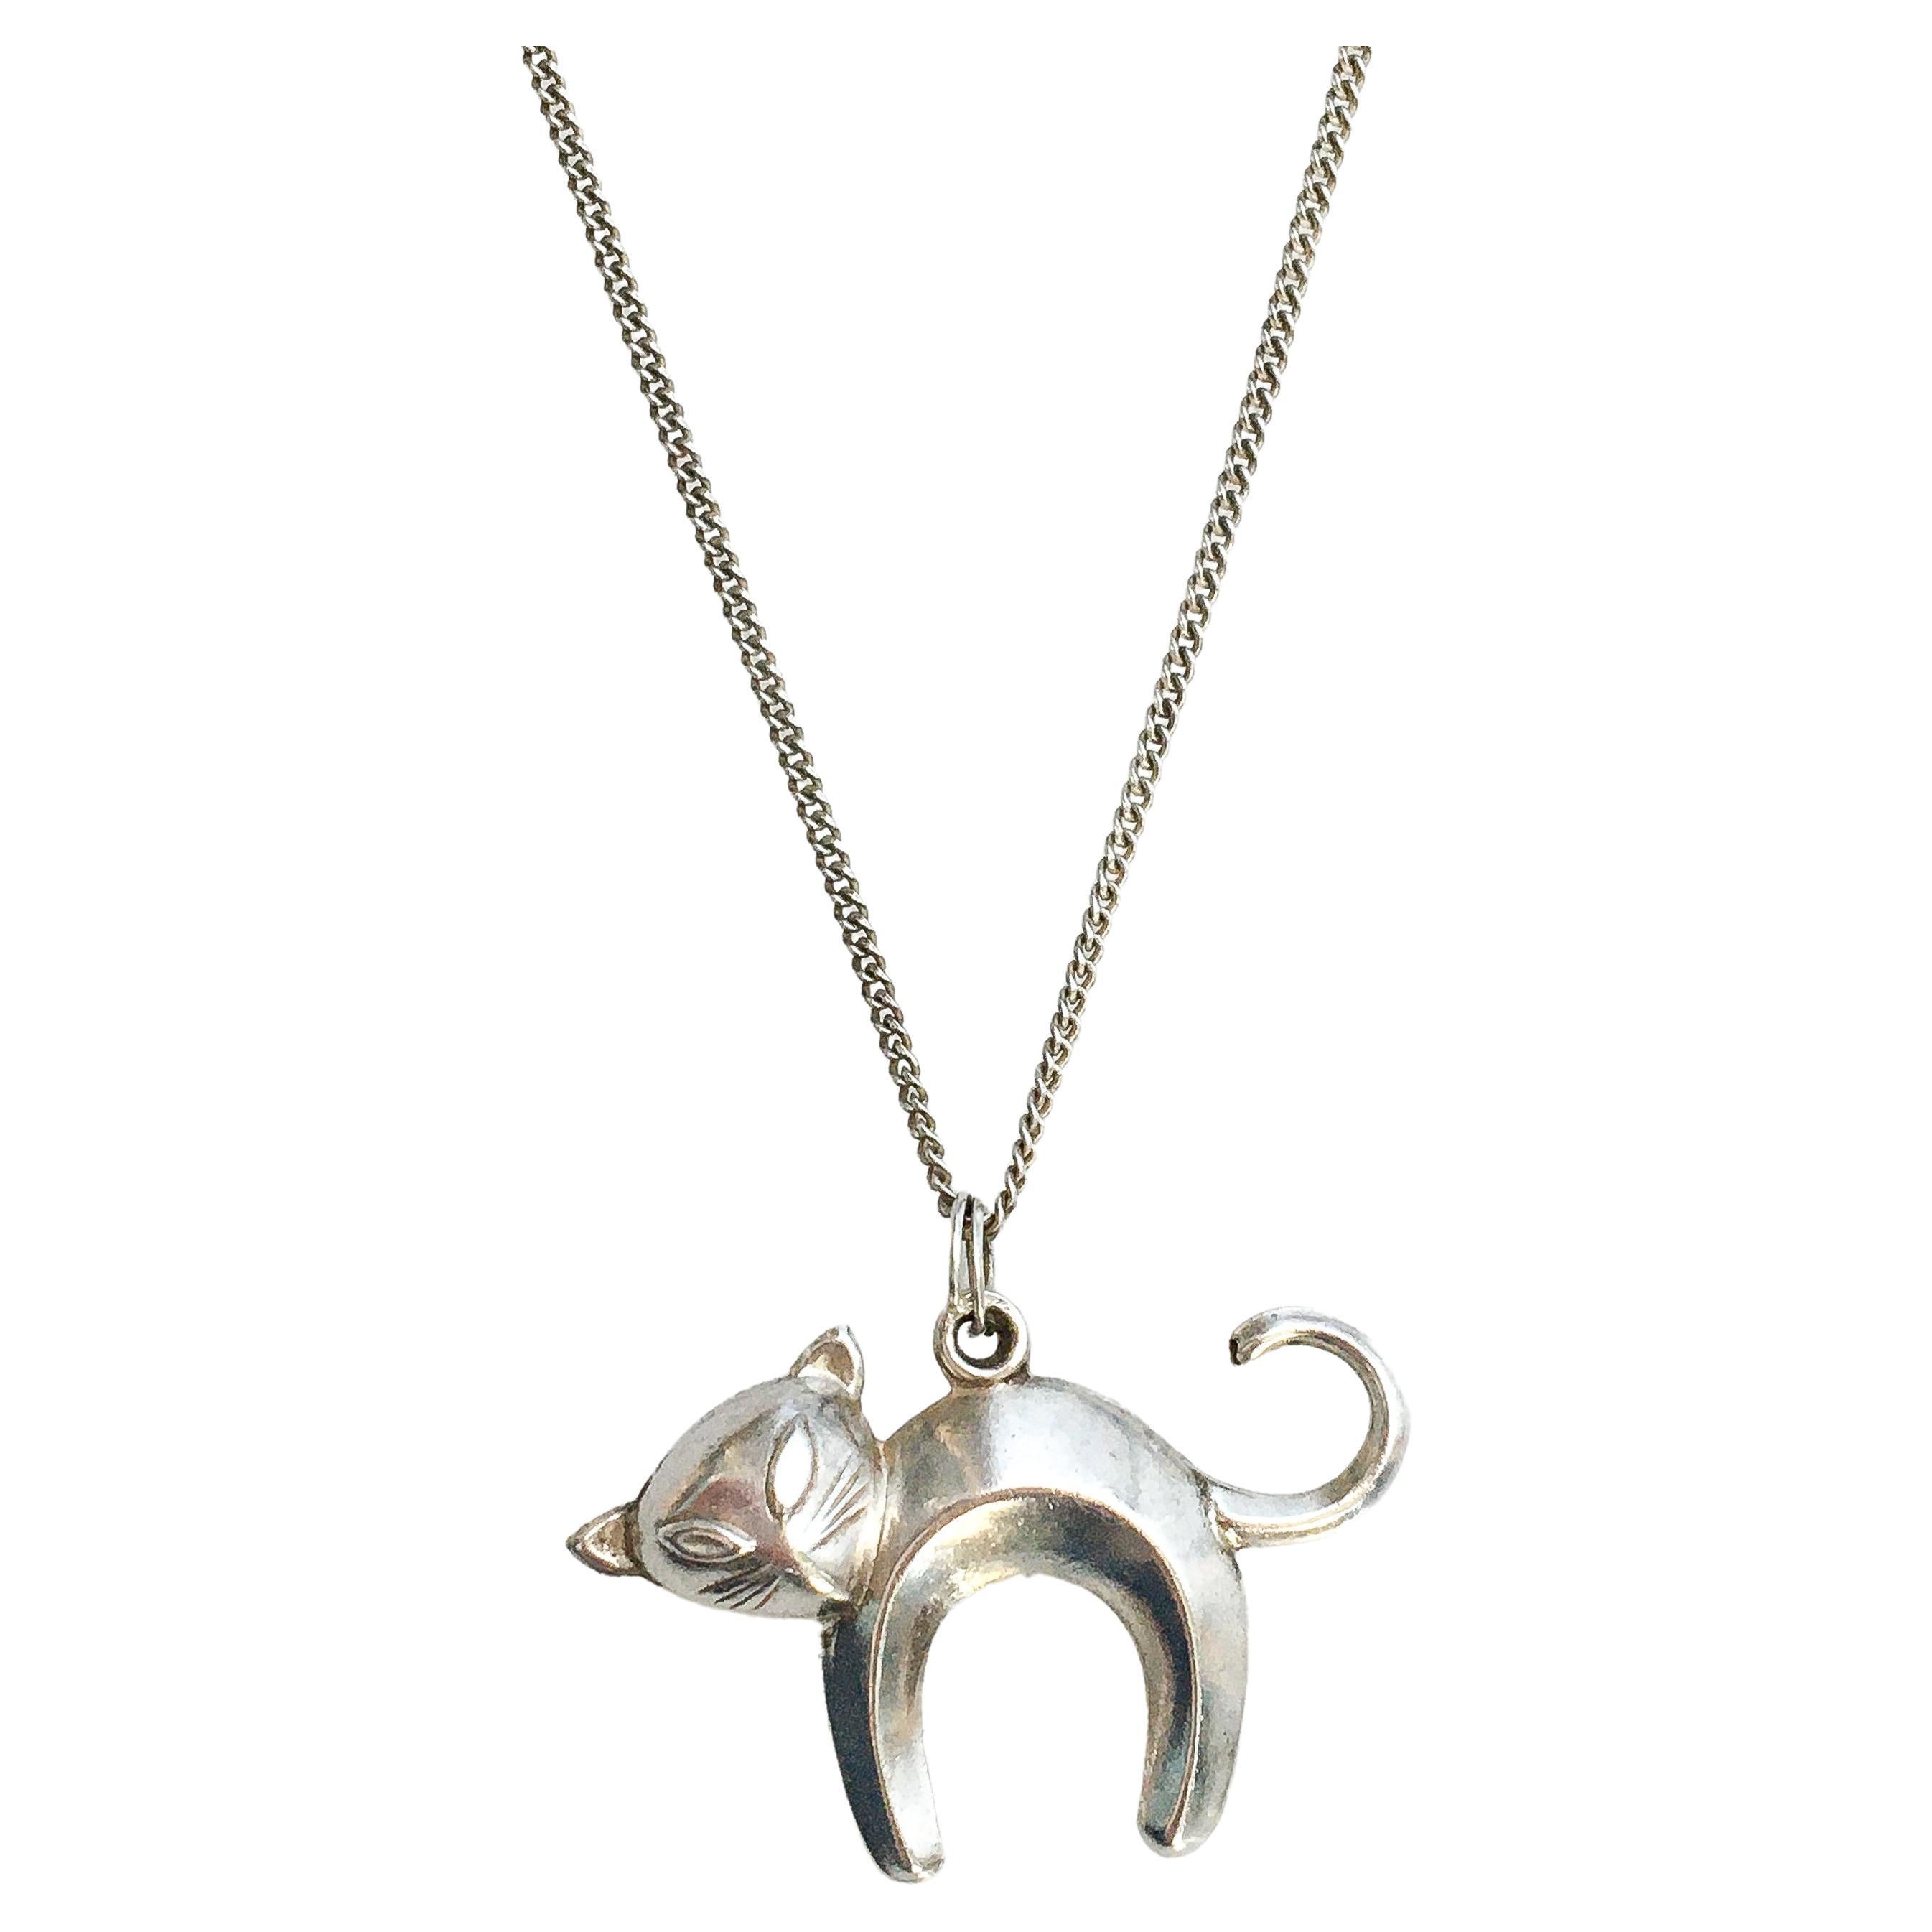 This vintage three-dimensional abstract silver arched cat charm is crafted in 835 silver. The cat is beautifully detailed and features a light brushed silver finish. Nice detailing to her ears, curled tail and arched back. The kitty cat is great